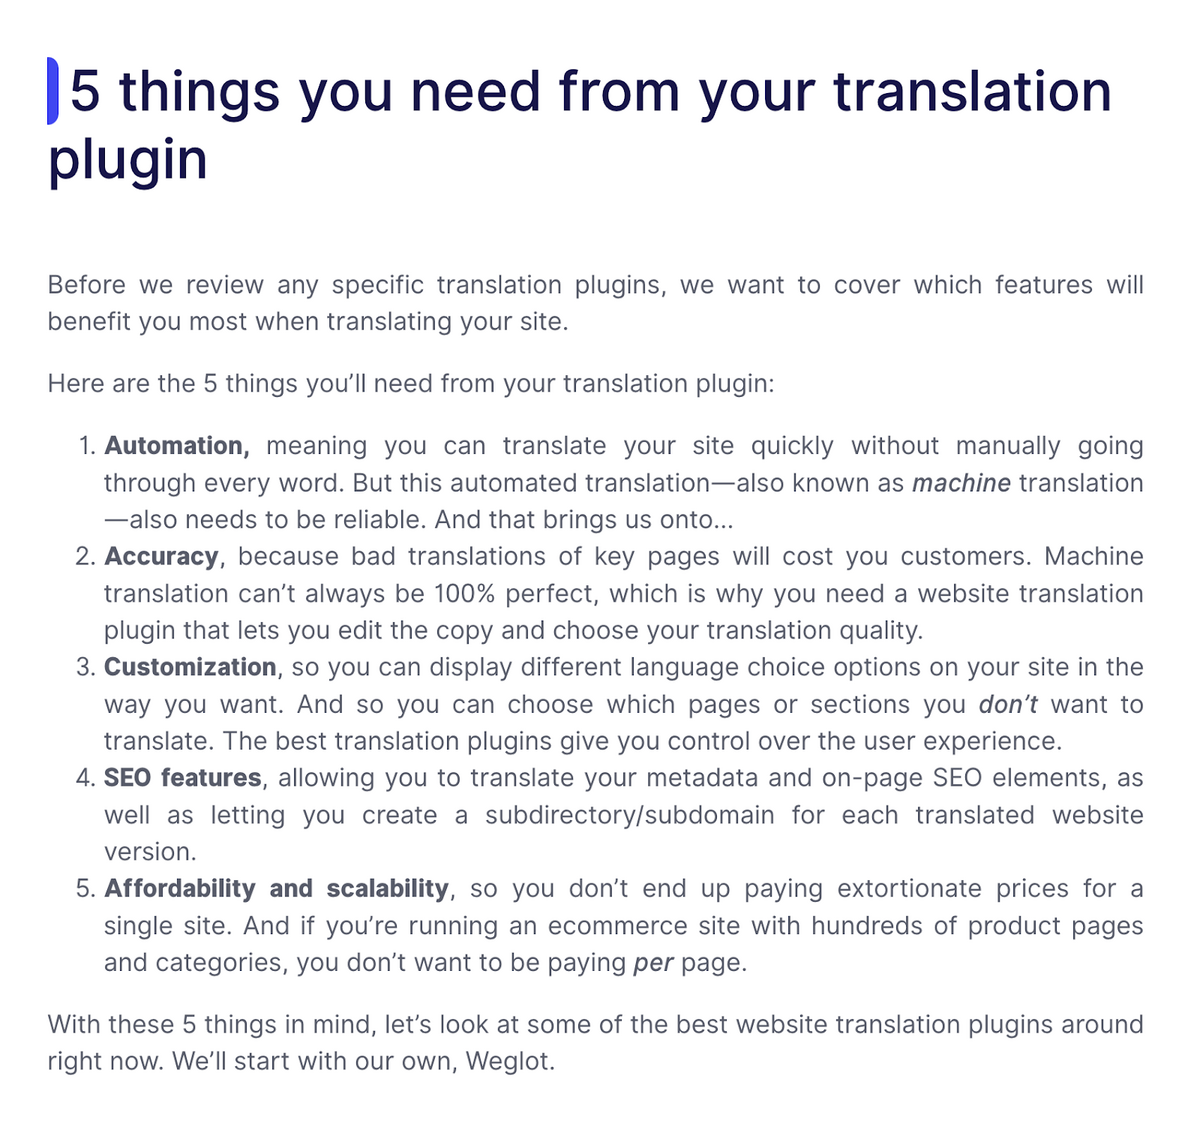 5 things you need from your translation plugin.